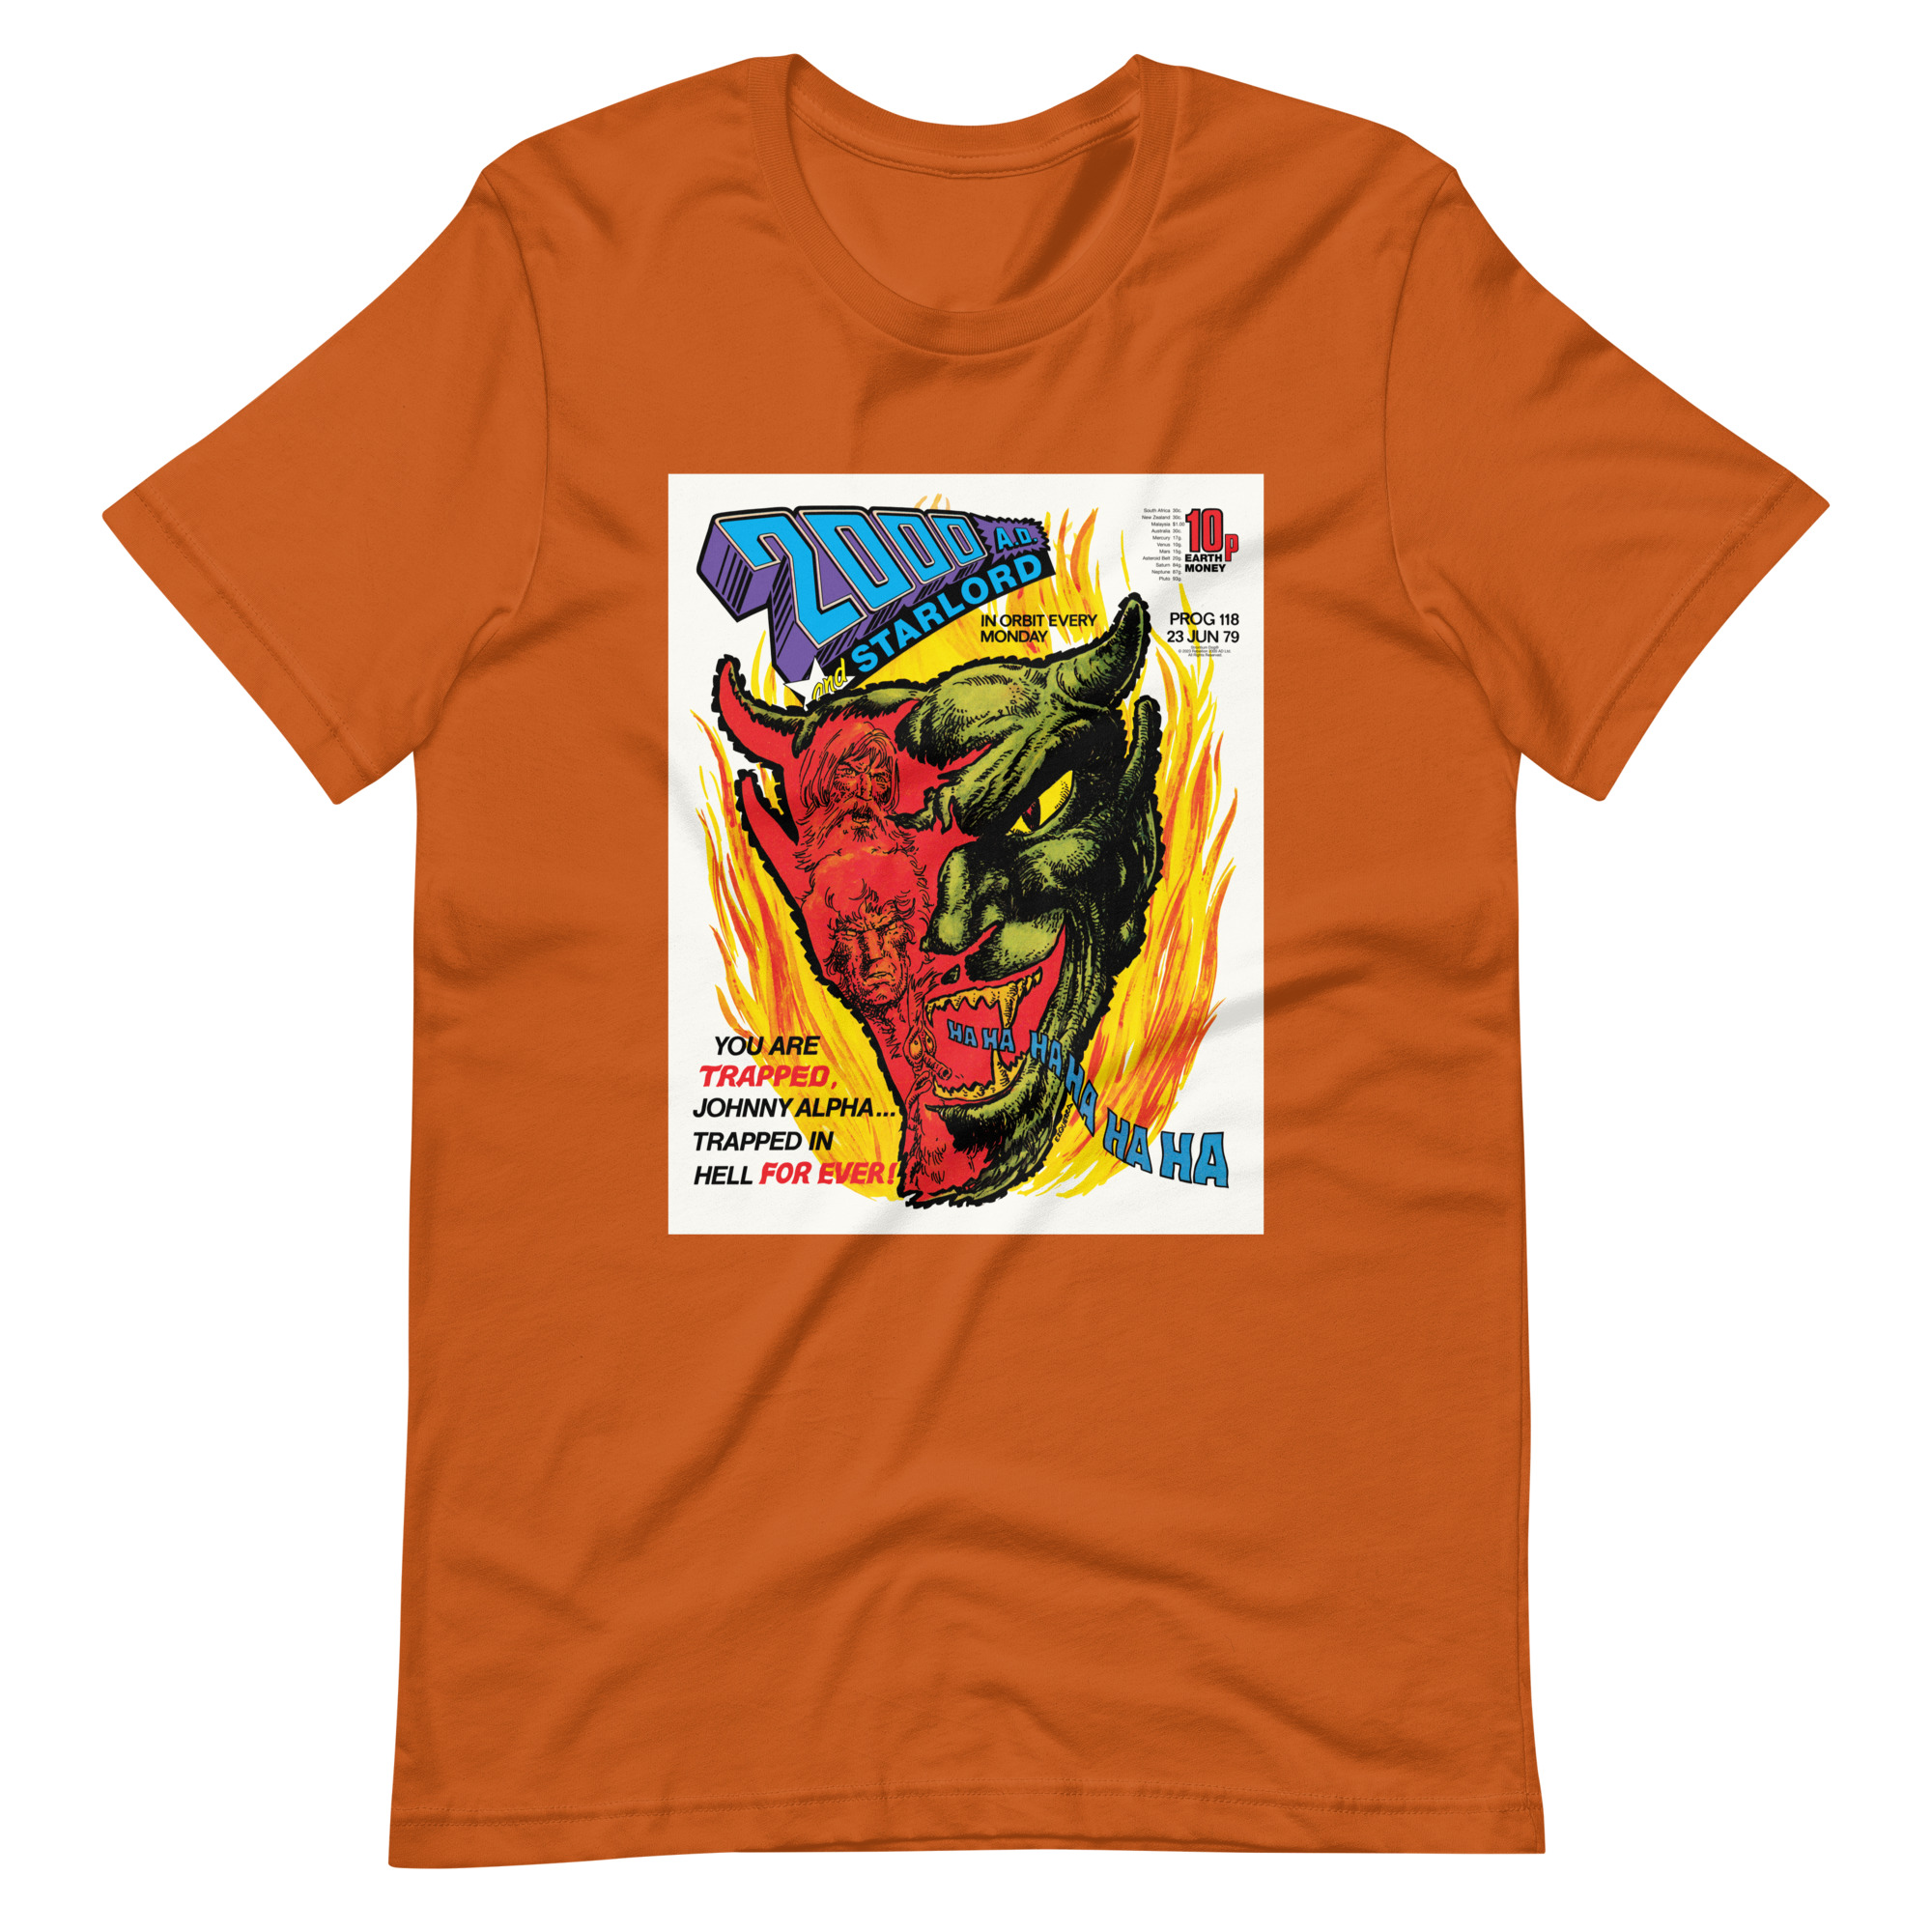 Rust Orange Tshirt with an image on the chest. Image is cover of 2000 AD prog 118 and depicts a laughing Devil face in flames